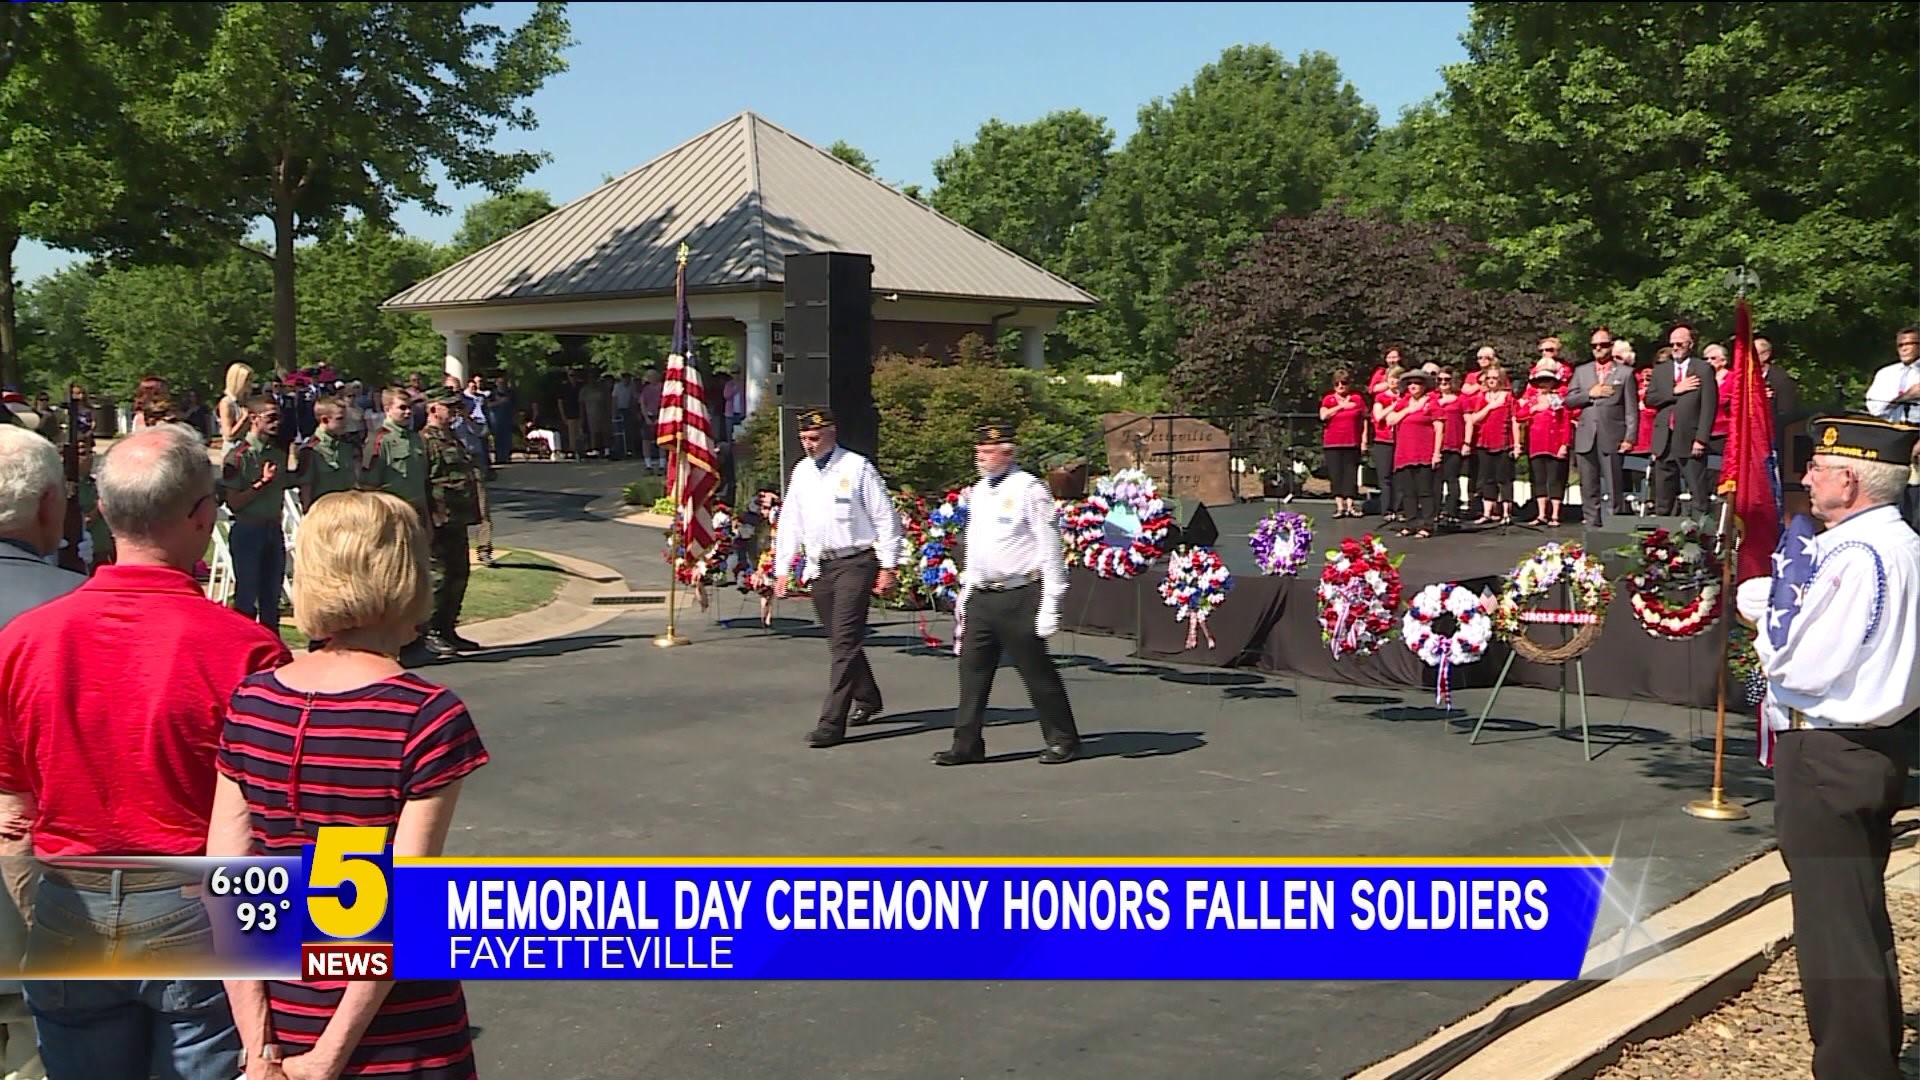 Memorial Day Ceremony Honors Fallen Soldiers